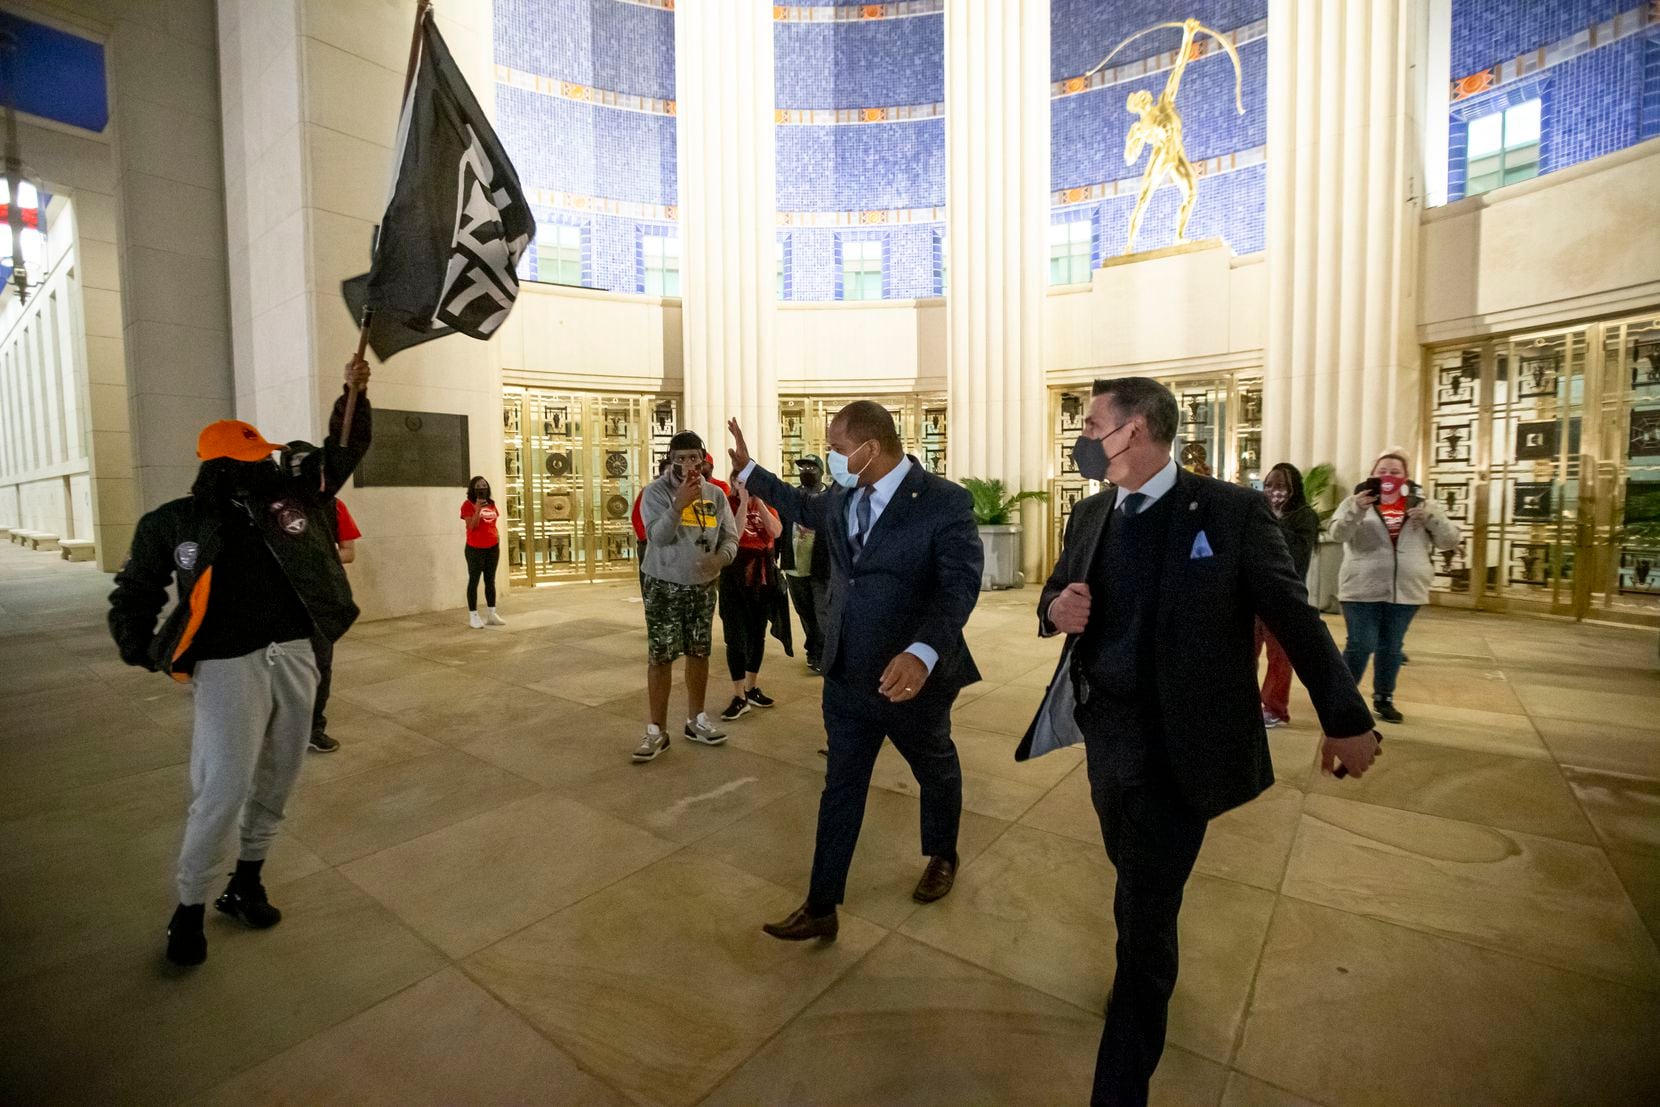 Dallas Mayor Eric Johnson waved to demonstrators with Next Generation Action Network as he left the Hall of State in Fair Park after delivering his State of the City address in Dallas on Tuesday. The demonstrators called for Johnson to resign. (Brandon Wade/Special Contributor)